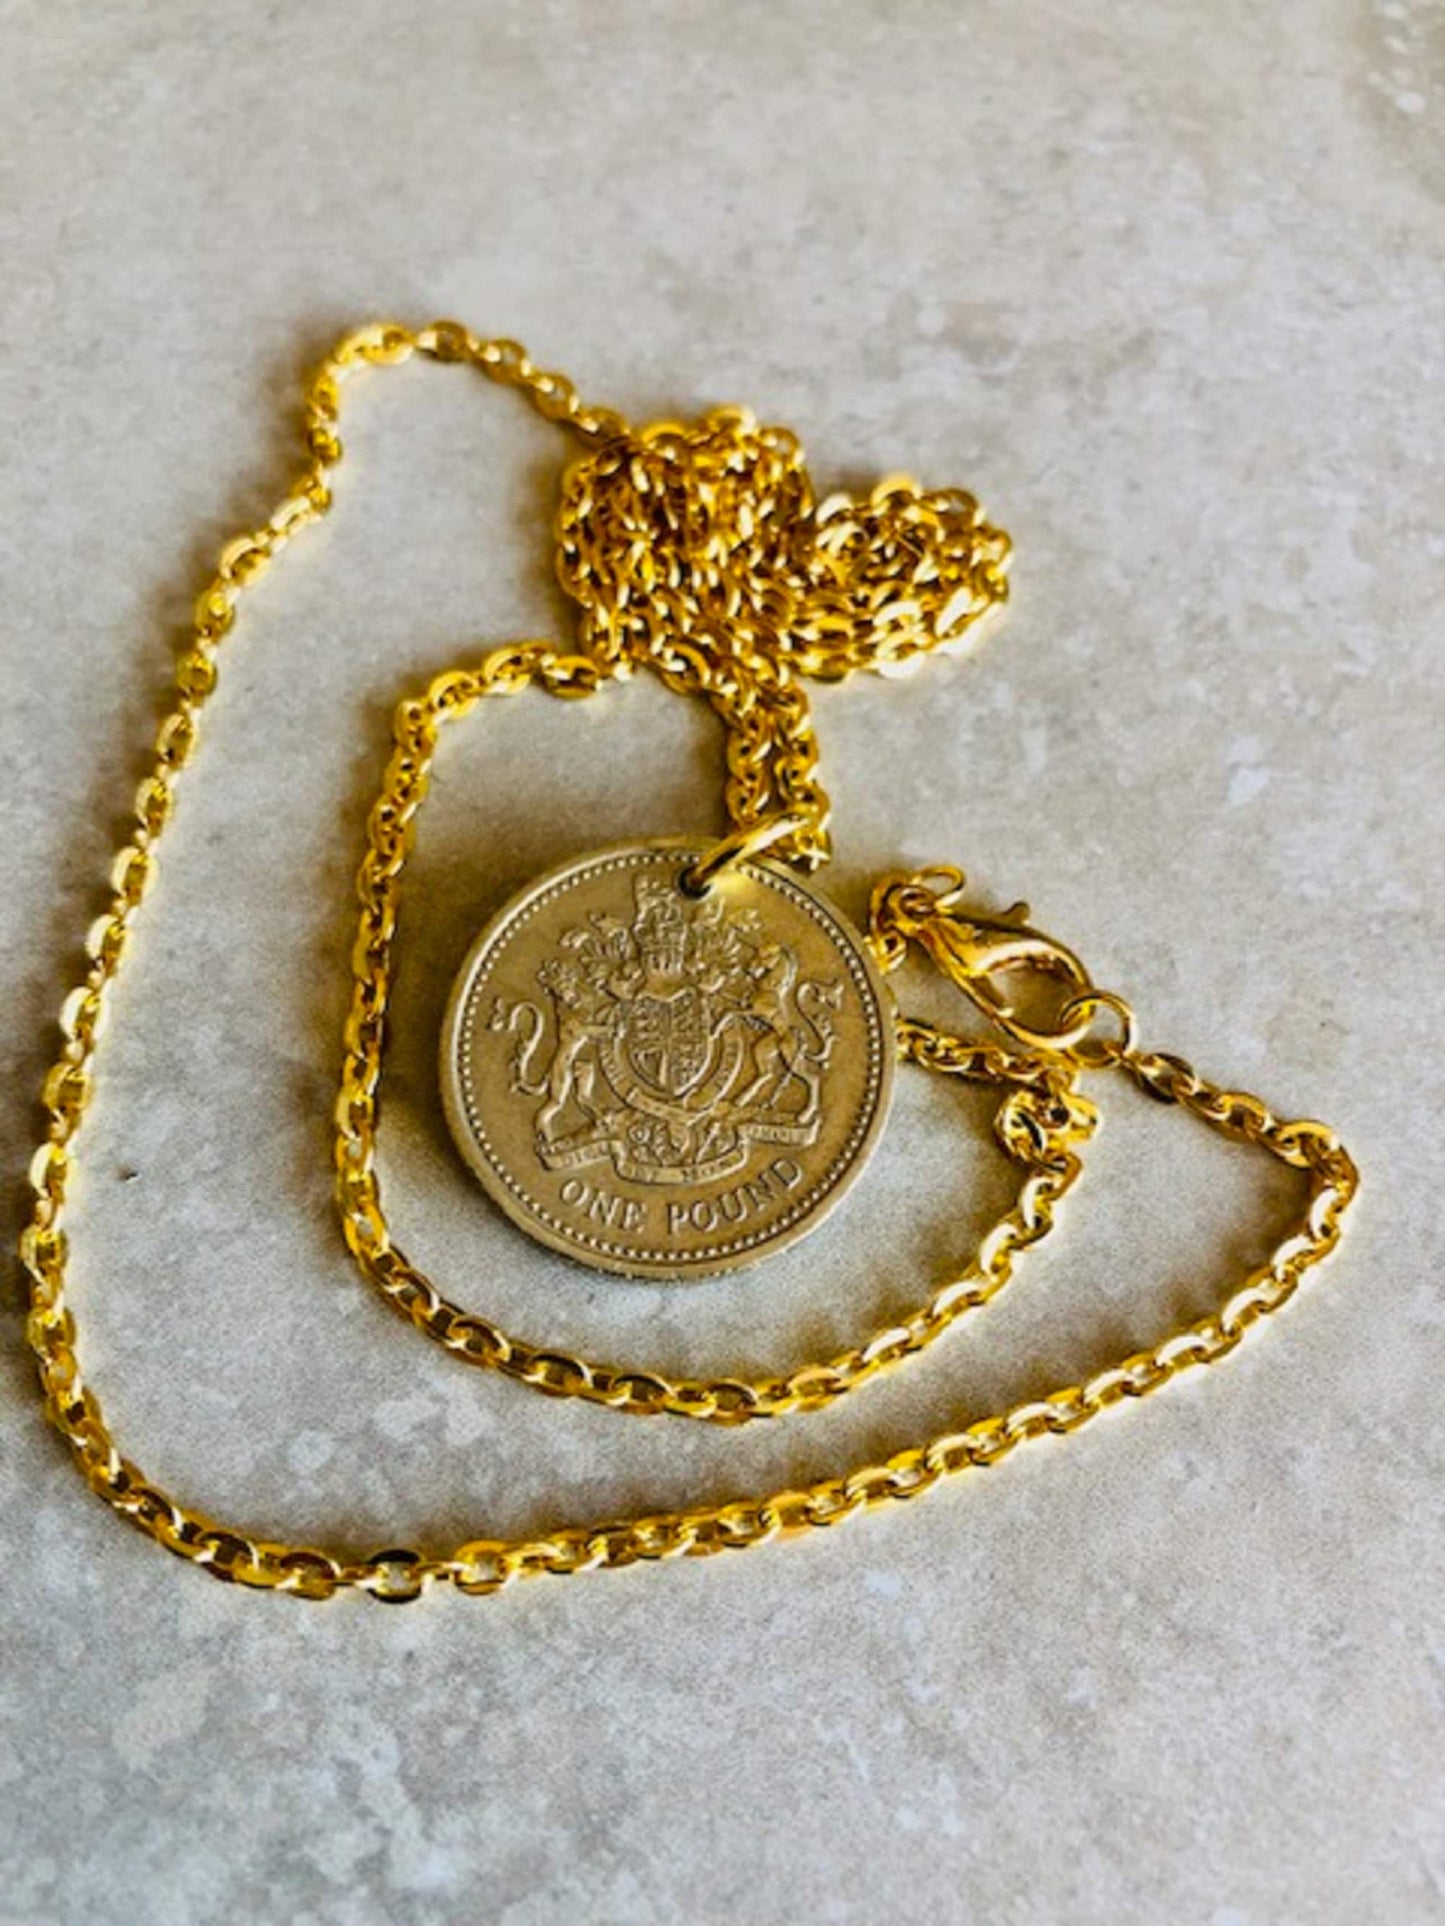 United Kingdom Coin Necklace One Pound UK Pendant Vintage Custom Jewelry Rare coins - Coin Enthusiast Fashion Accessory Handmade